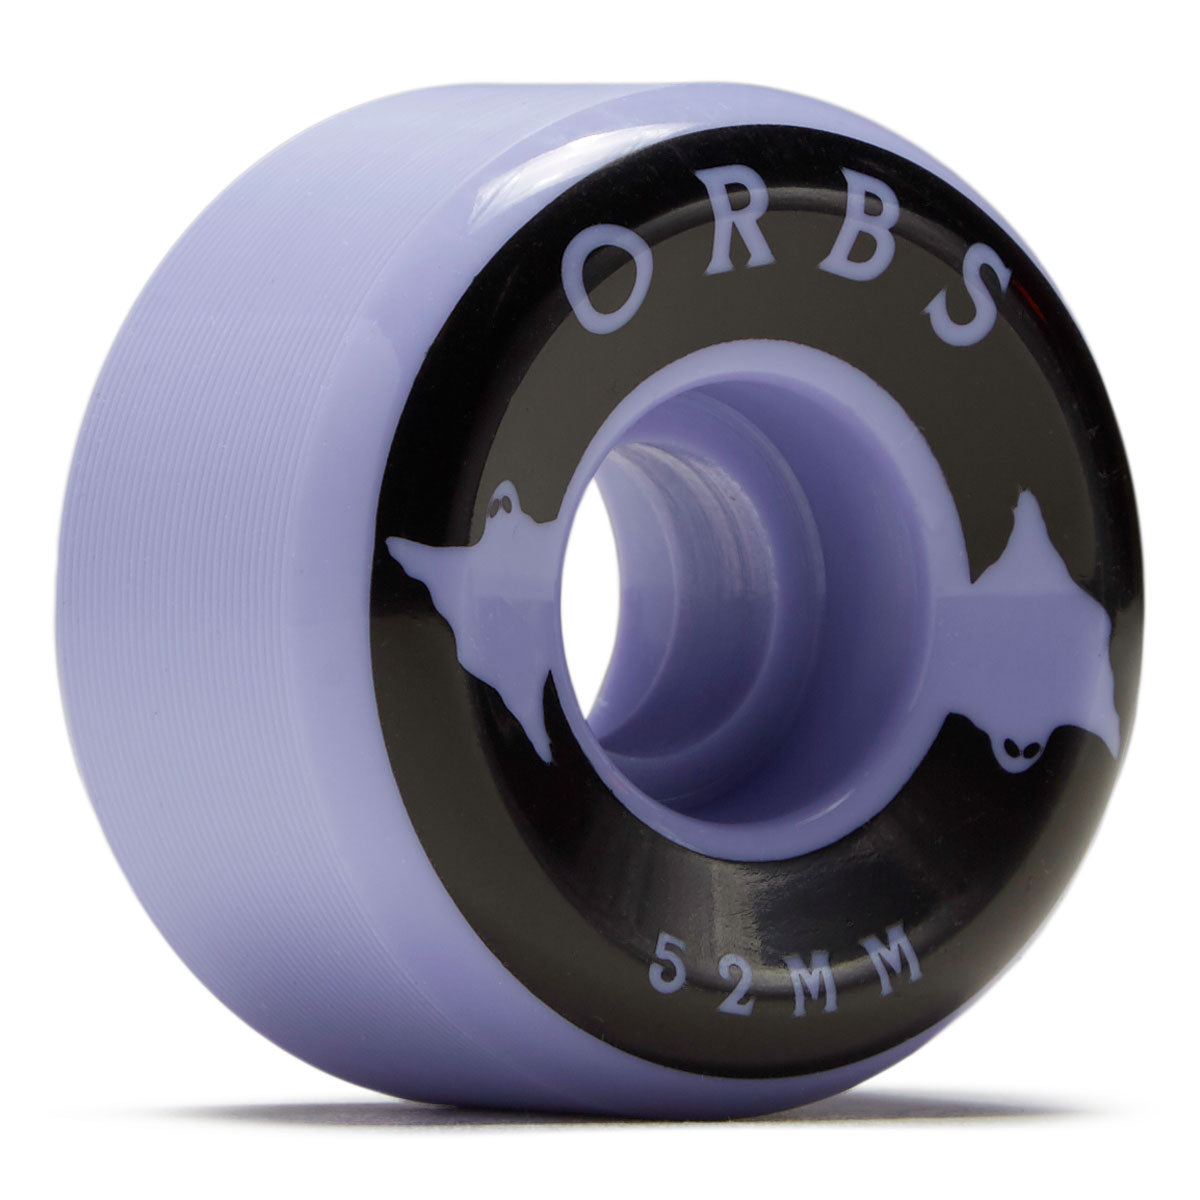 Welcome Orbs Specters Conical 99A Skateboard Wheels - Lavender - 52mm image 1